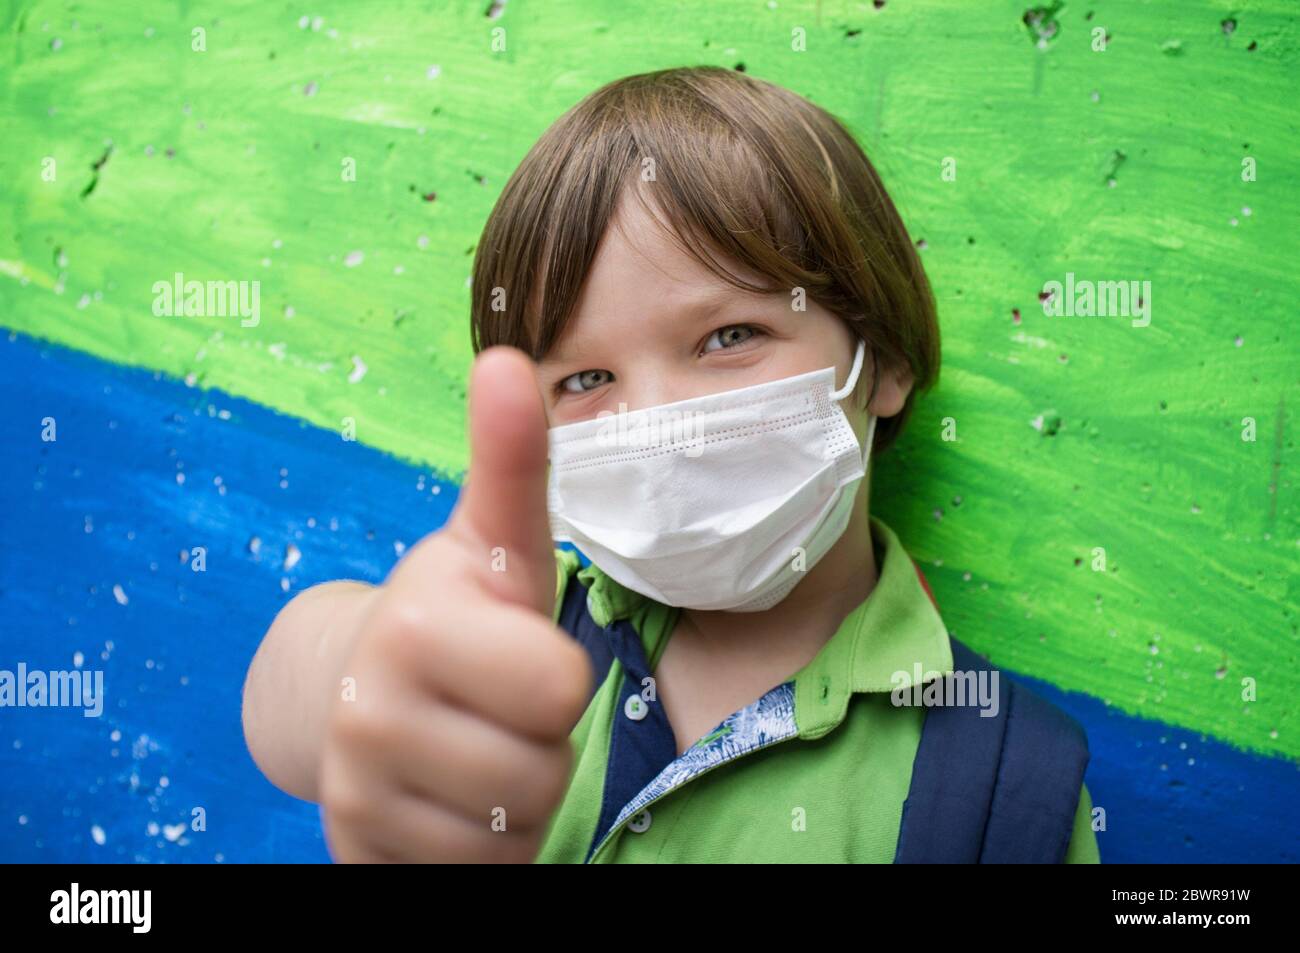 4 years little boy wearing a face mask doing the thumbs up gesture. Lively colored concrete block as background. Stock Photo